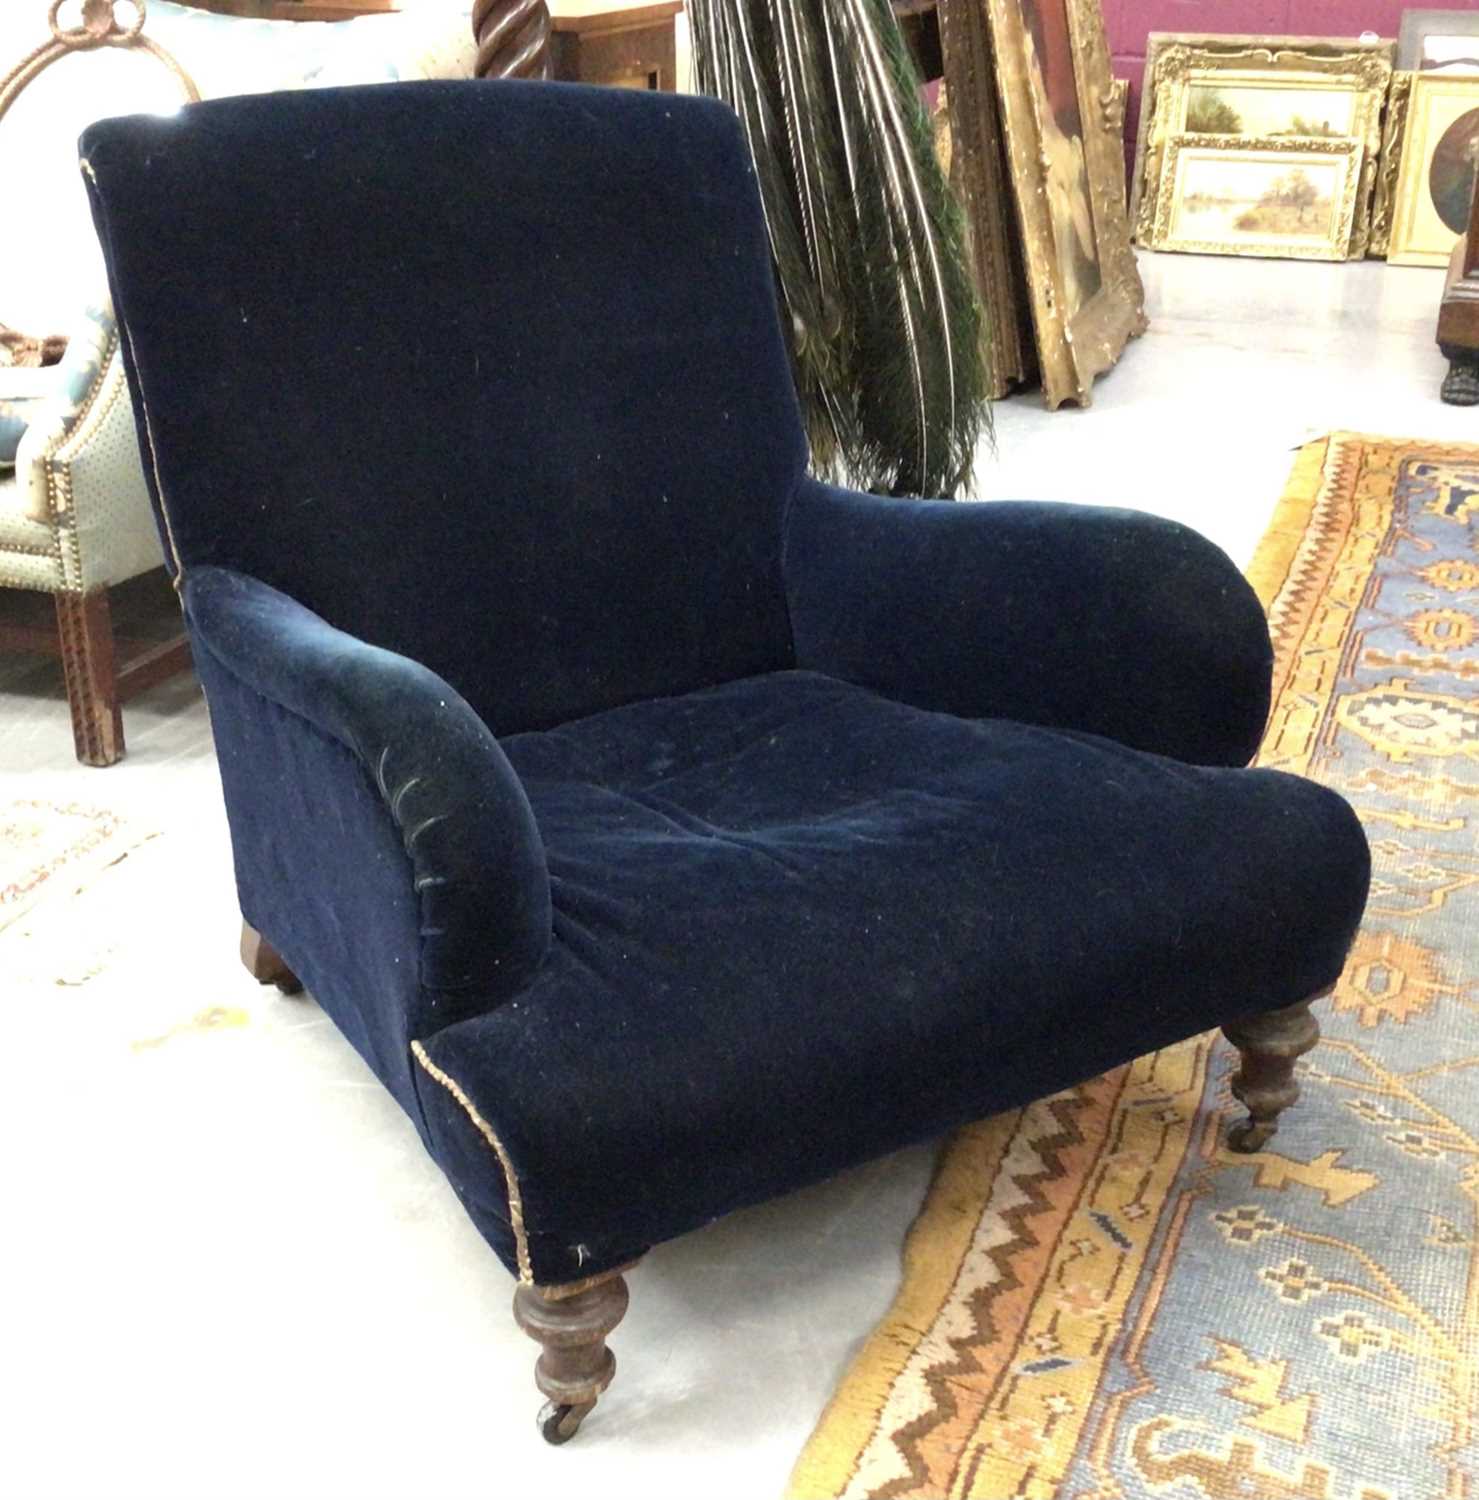 Lot 1566 - Late 19th / early 20th century oak upholstered deep armchair in the manner of Howard & Sons